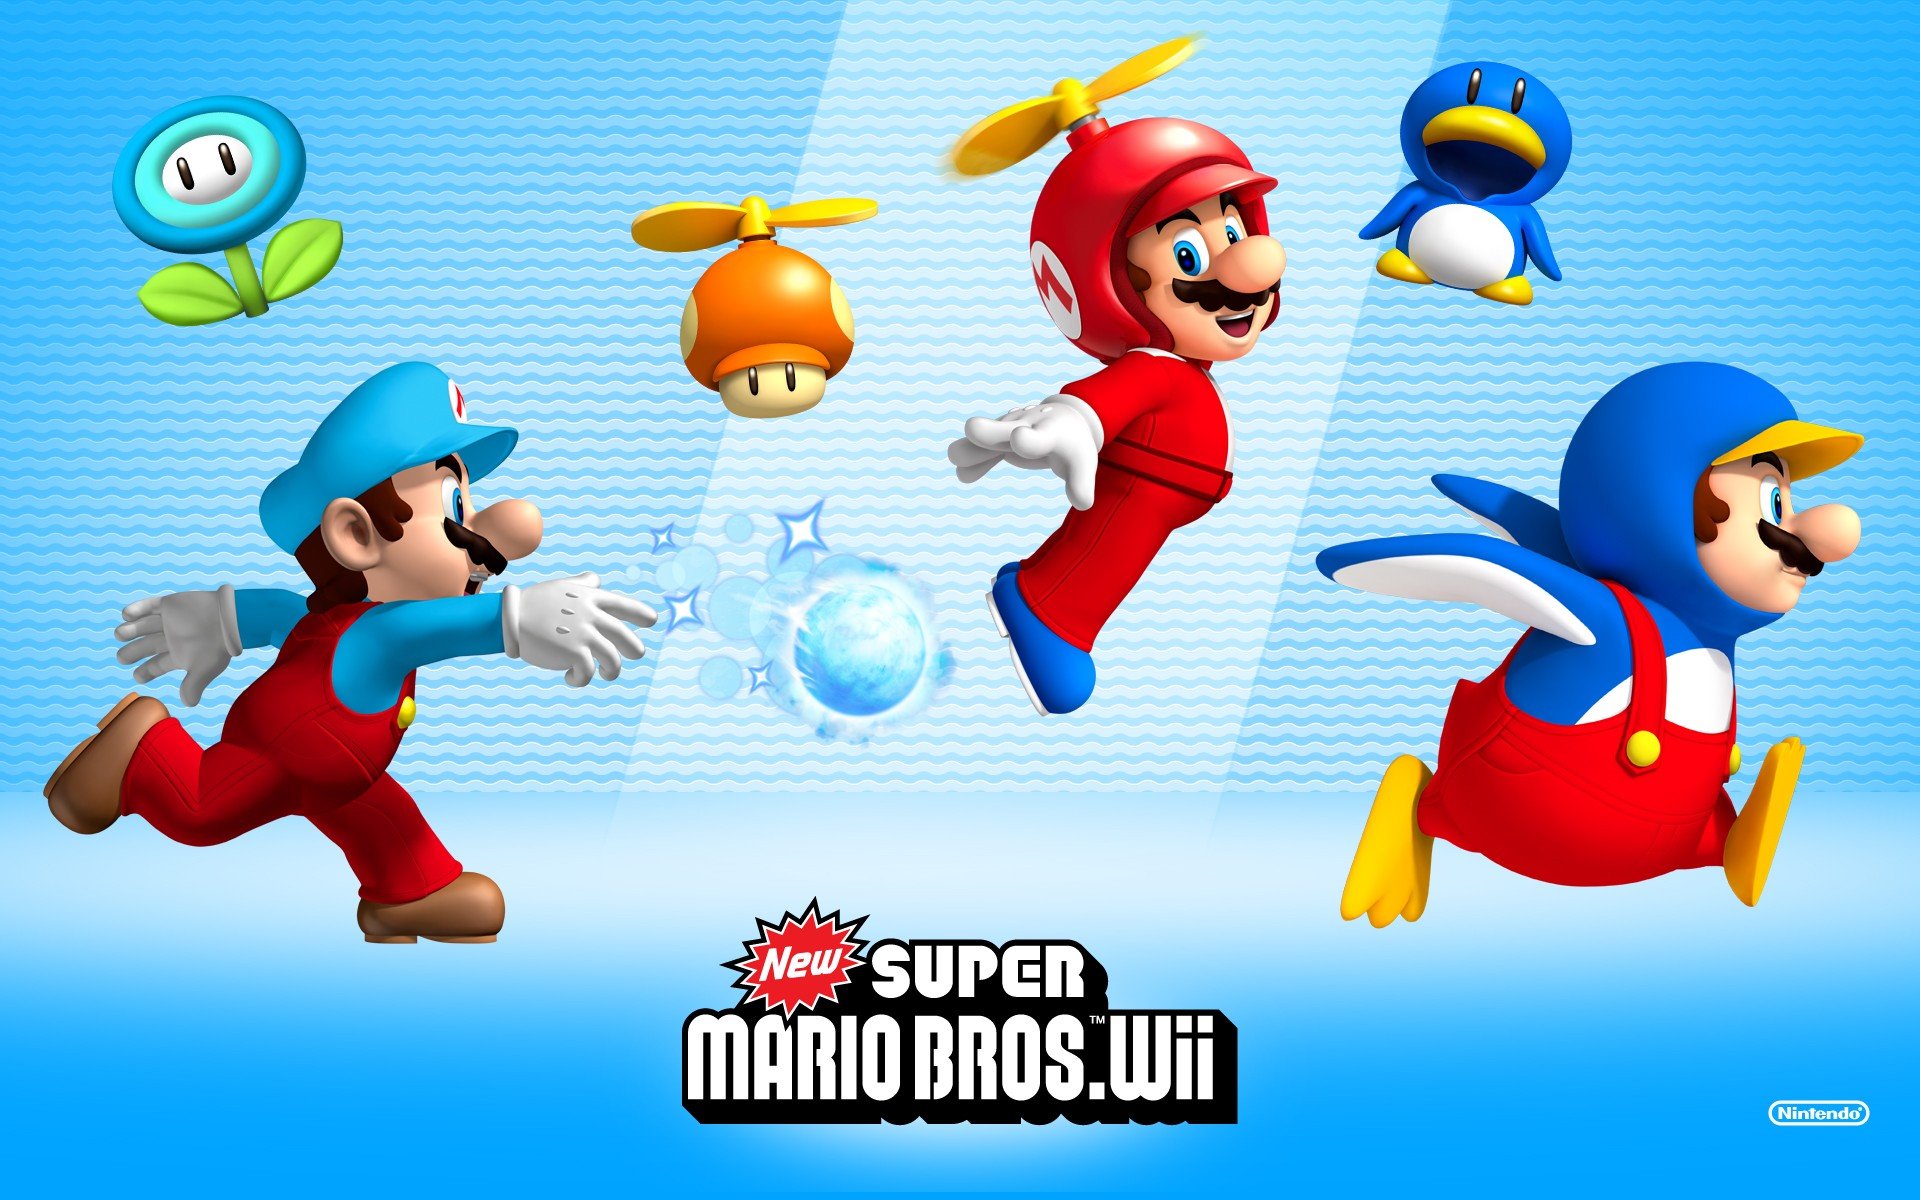 Download hd 1920x1200 New Super Mario Bros. Wii desktop background ID:113192 for free